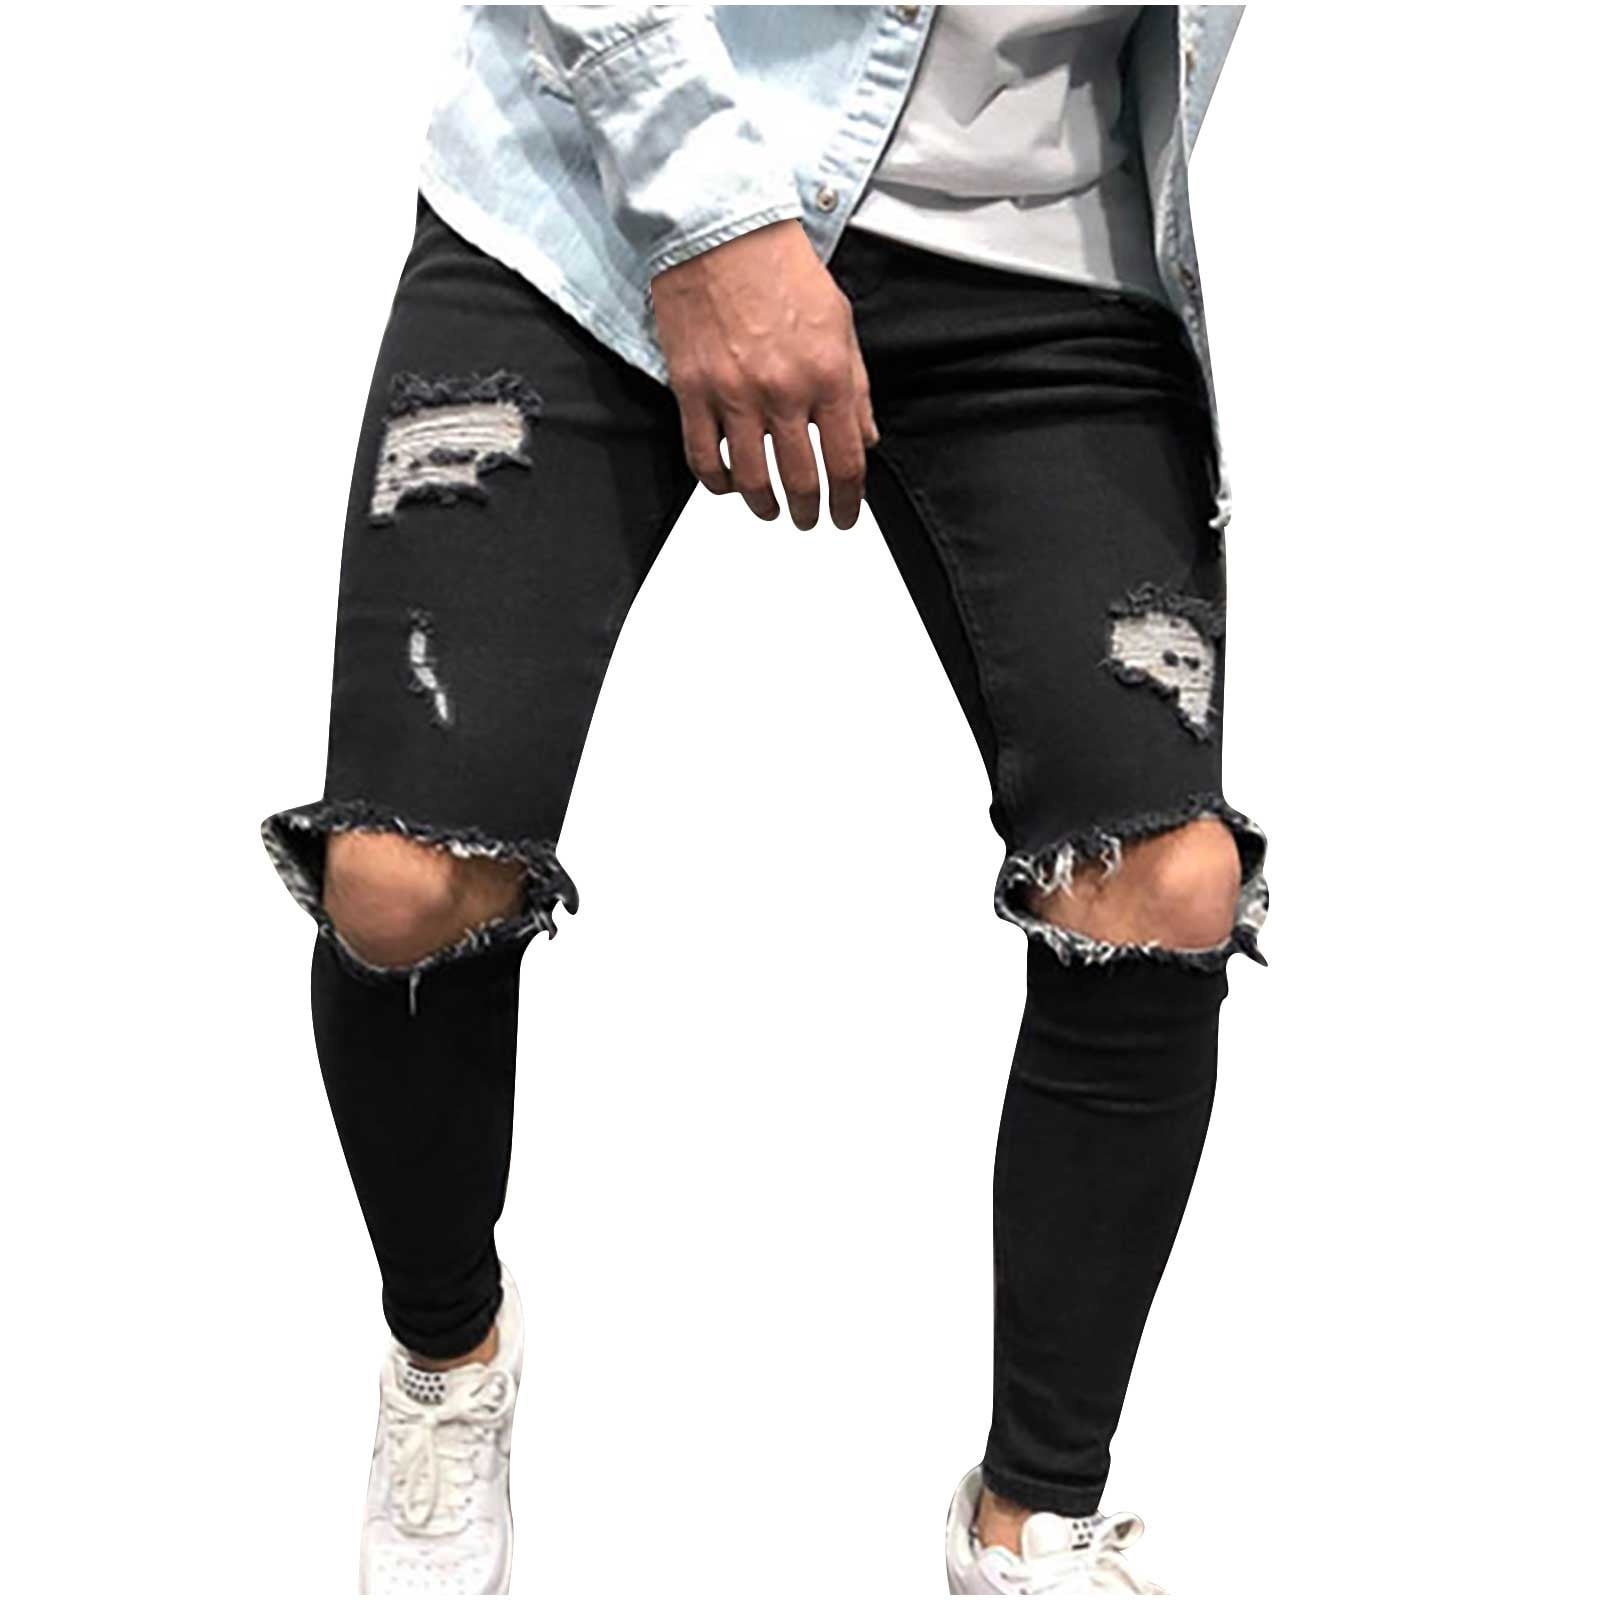 European and American Small feet Zipper Jeans Men's Fashion Knee-Hole  Stretch Casual Pants : Amazon.ca: Clothing, Shoes & Accessories